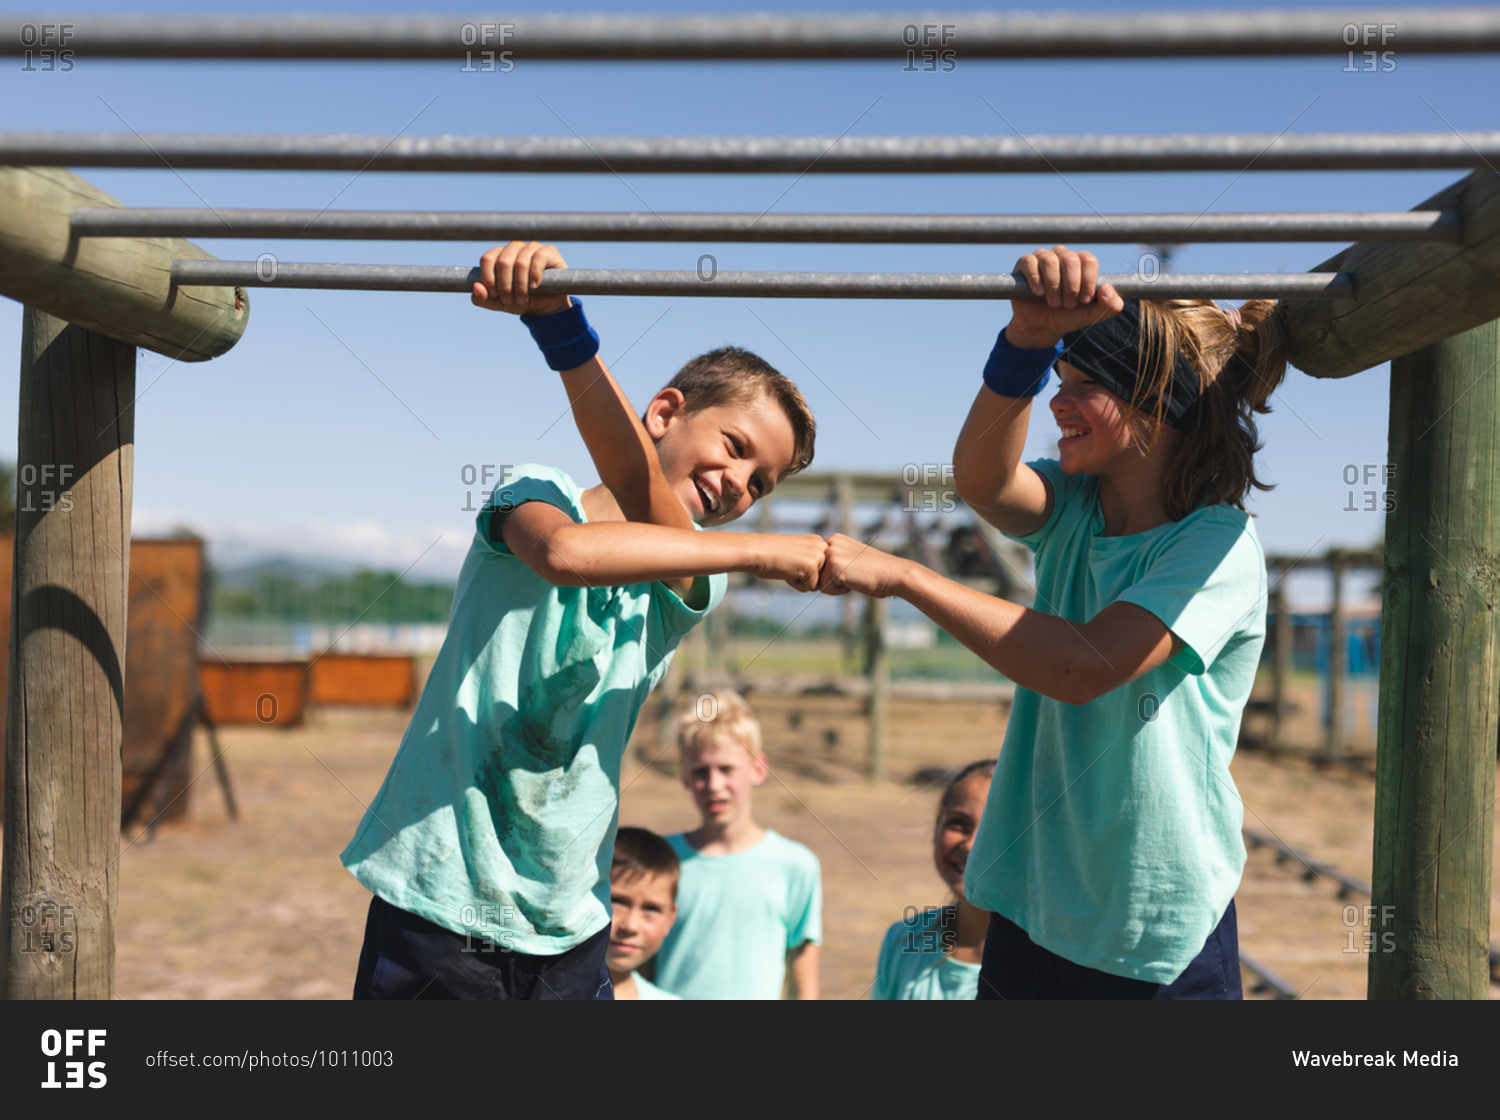 Two smiling Caucasian boys at a boot camp on a sunny day, standing beside each other holding on to the monkey bars, smiling and fist bumping, wearing green t shirts and black shorts